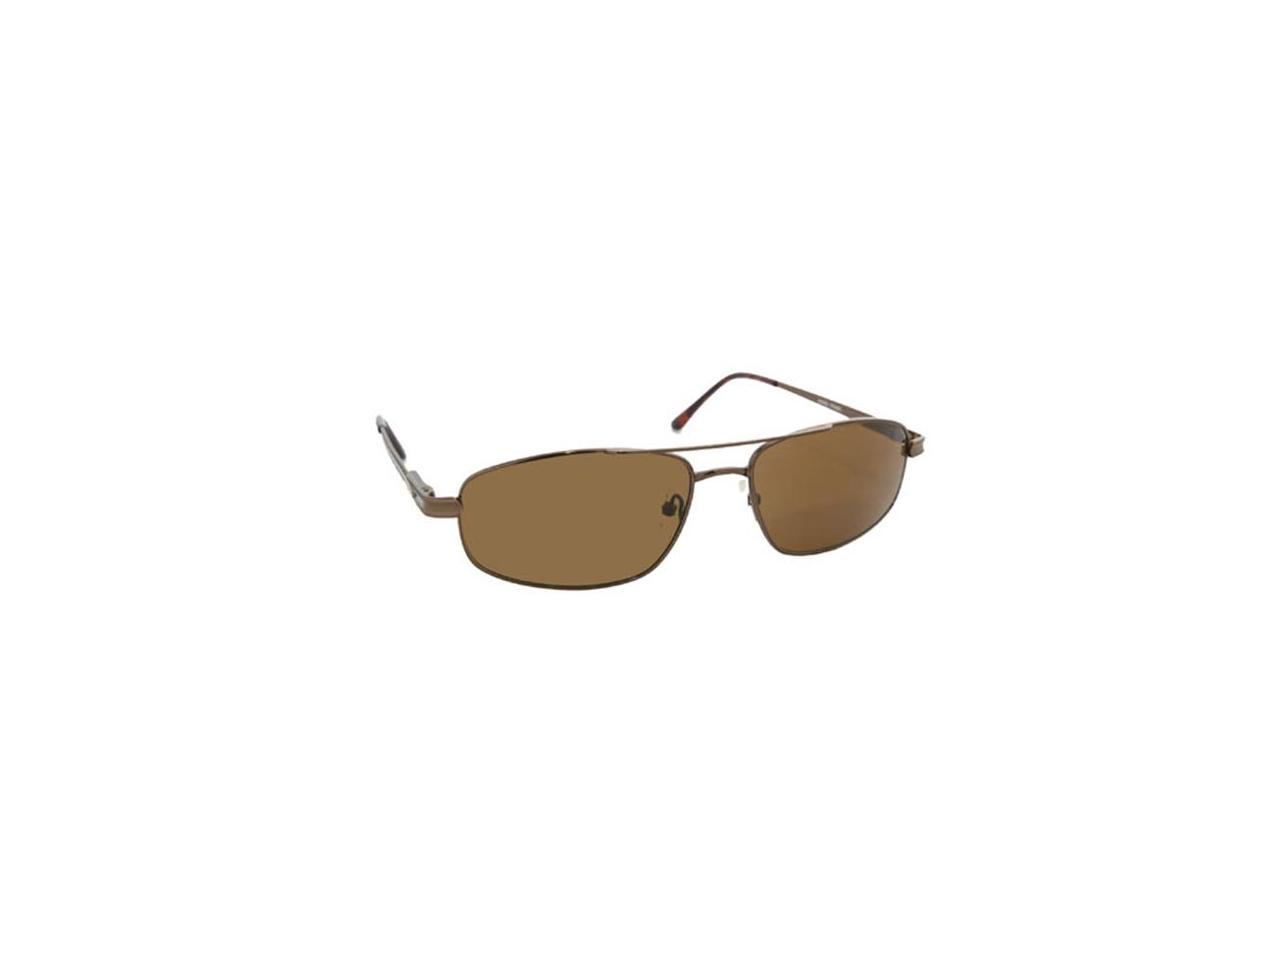 Picture of Coppermax 3707GPP BRN/AMBER Spectacle Polarized Sunglasses - Shiny Brown - Amber Lens